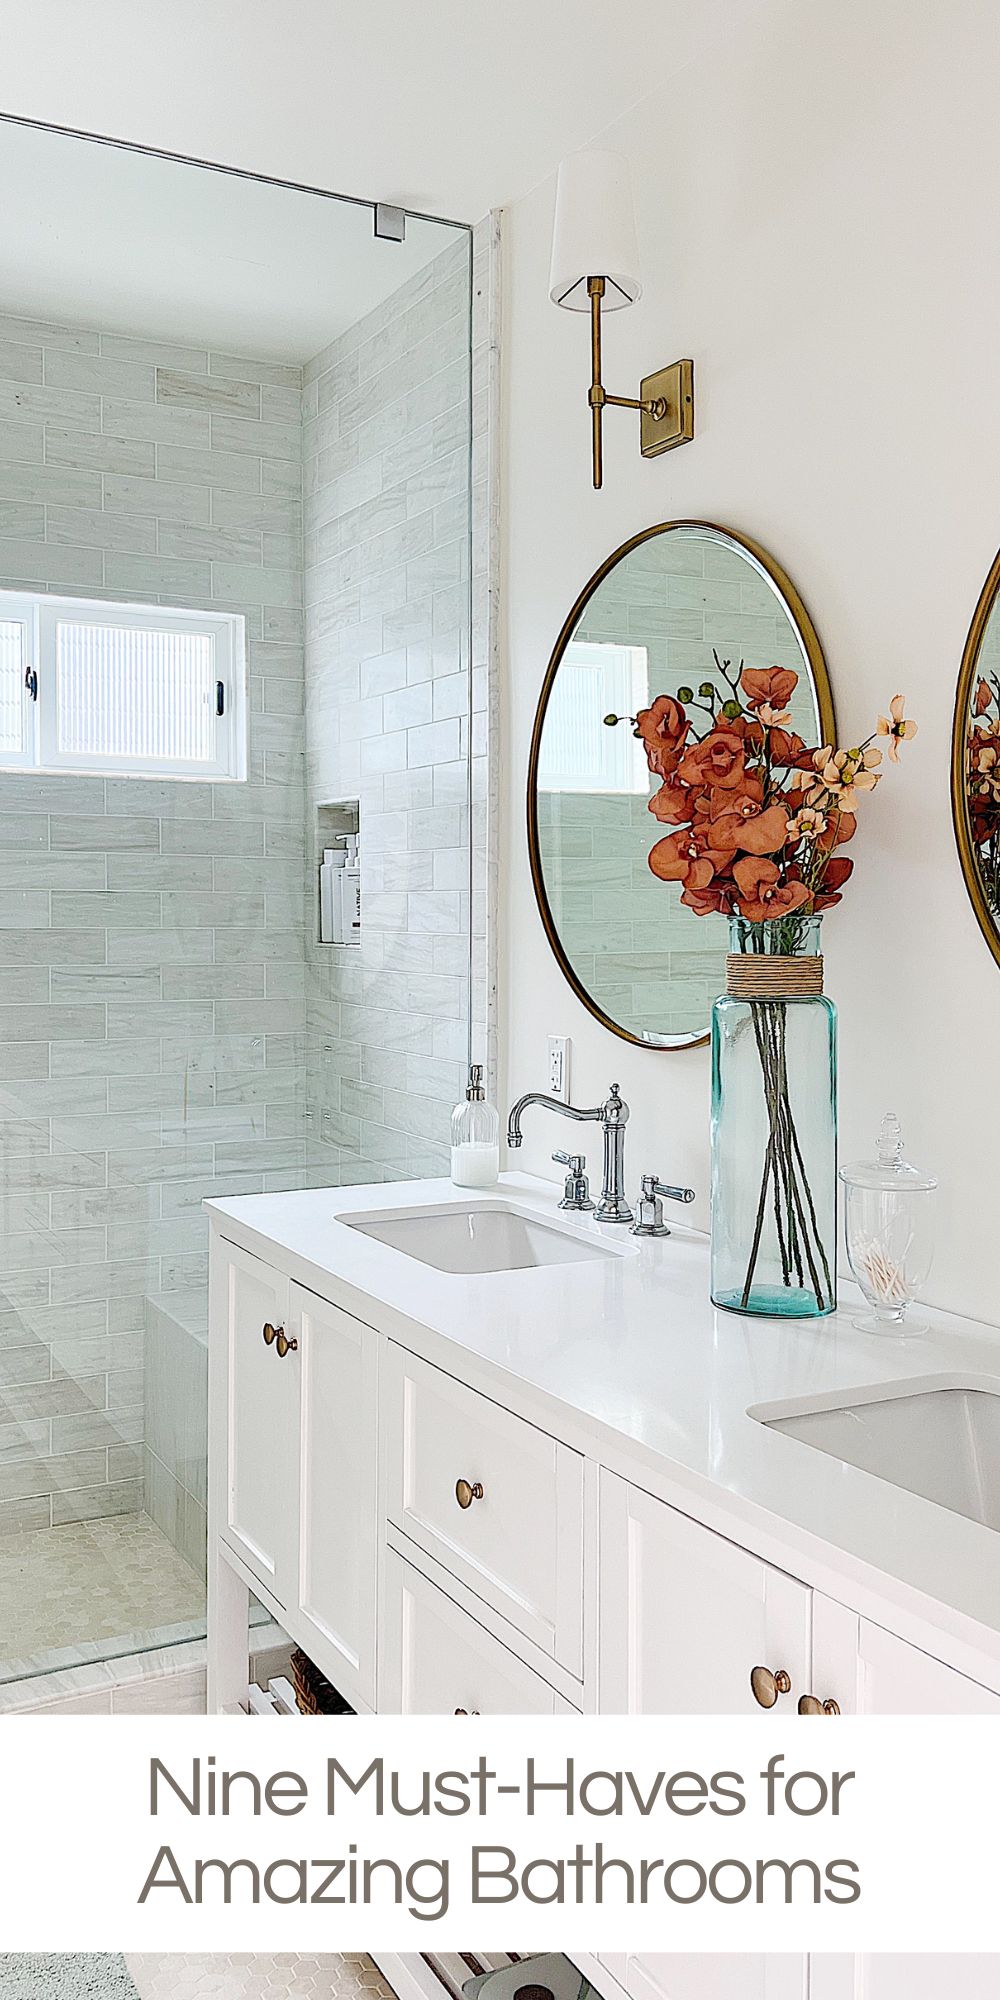 We just remodeled two bathrooms in our Ventura beach house and here are ten must-haves every bathroom needs. 